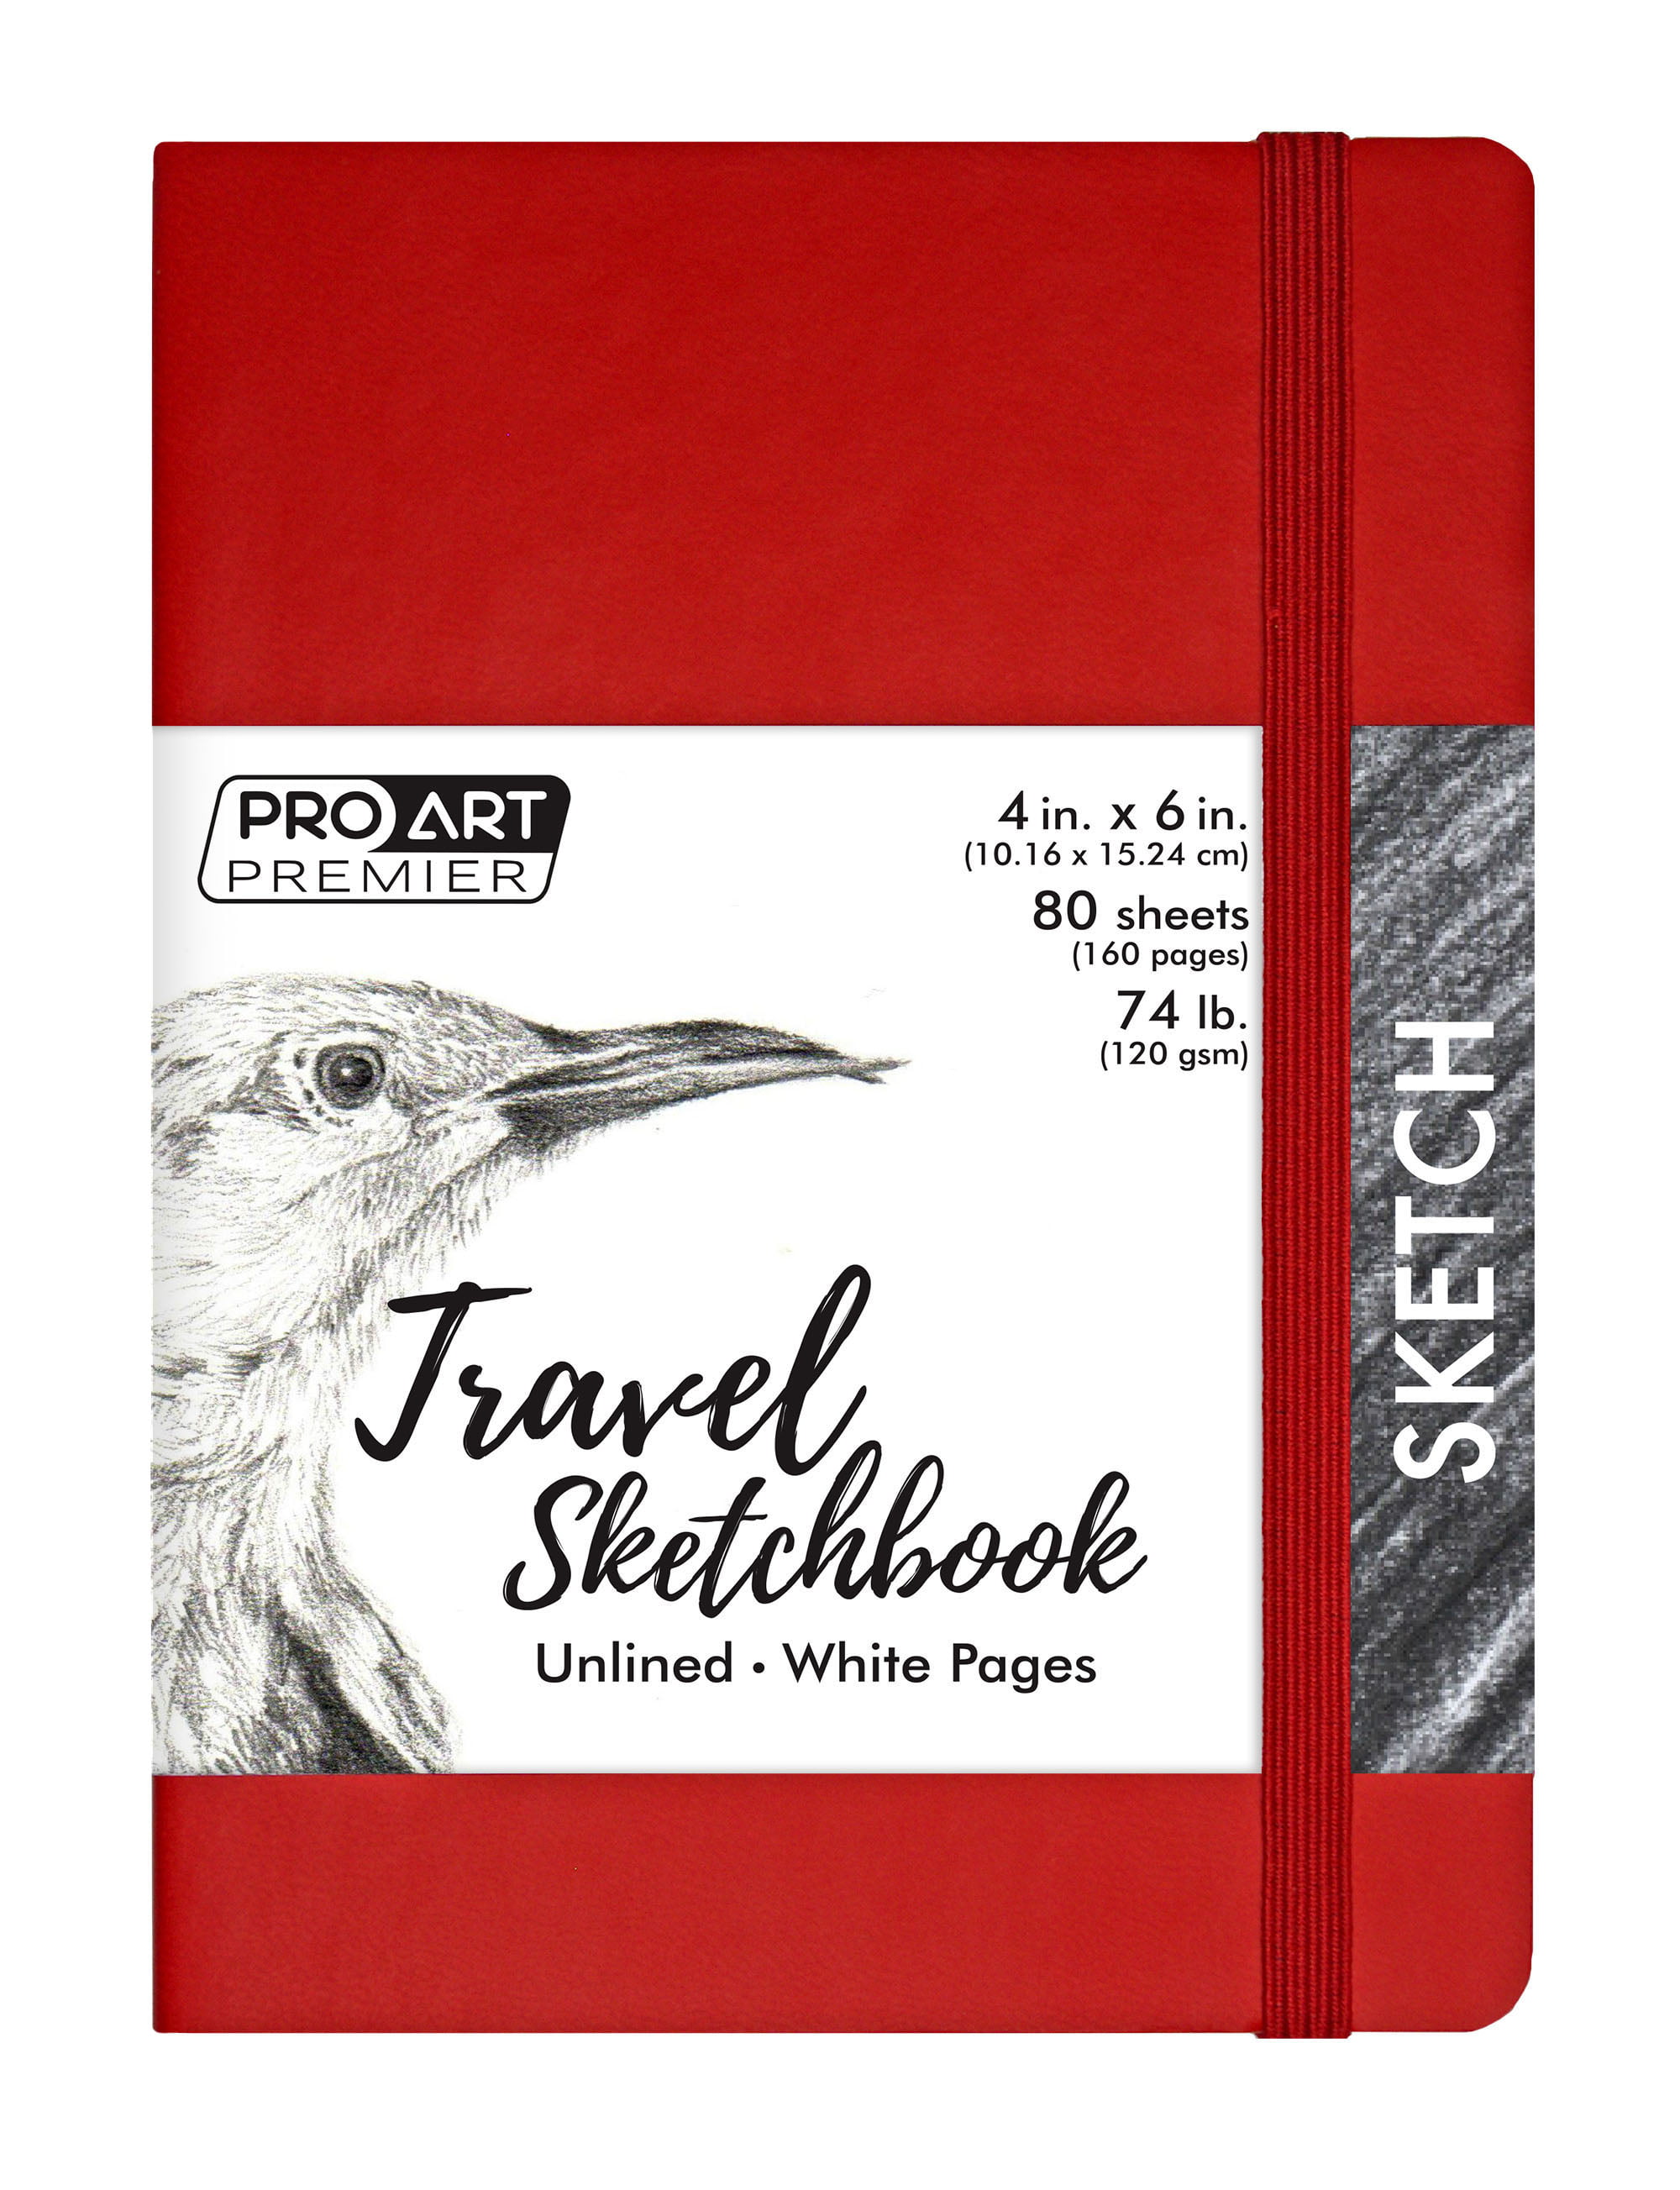 MUKCHAP 25 Pack A6 Spiral Bound Sketchbook, 4x6 inch Sketch Pads with 60 Sheets/120 Pages for Drawing, Painting